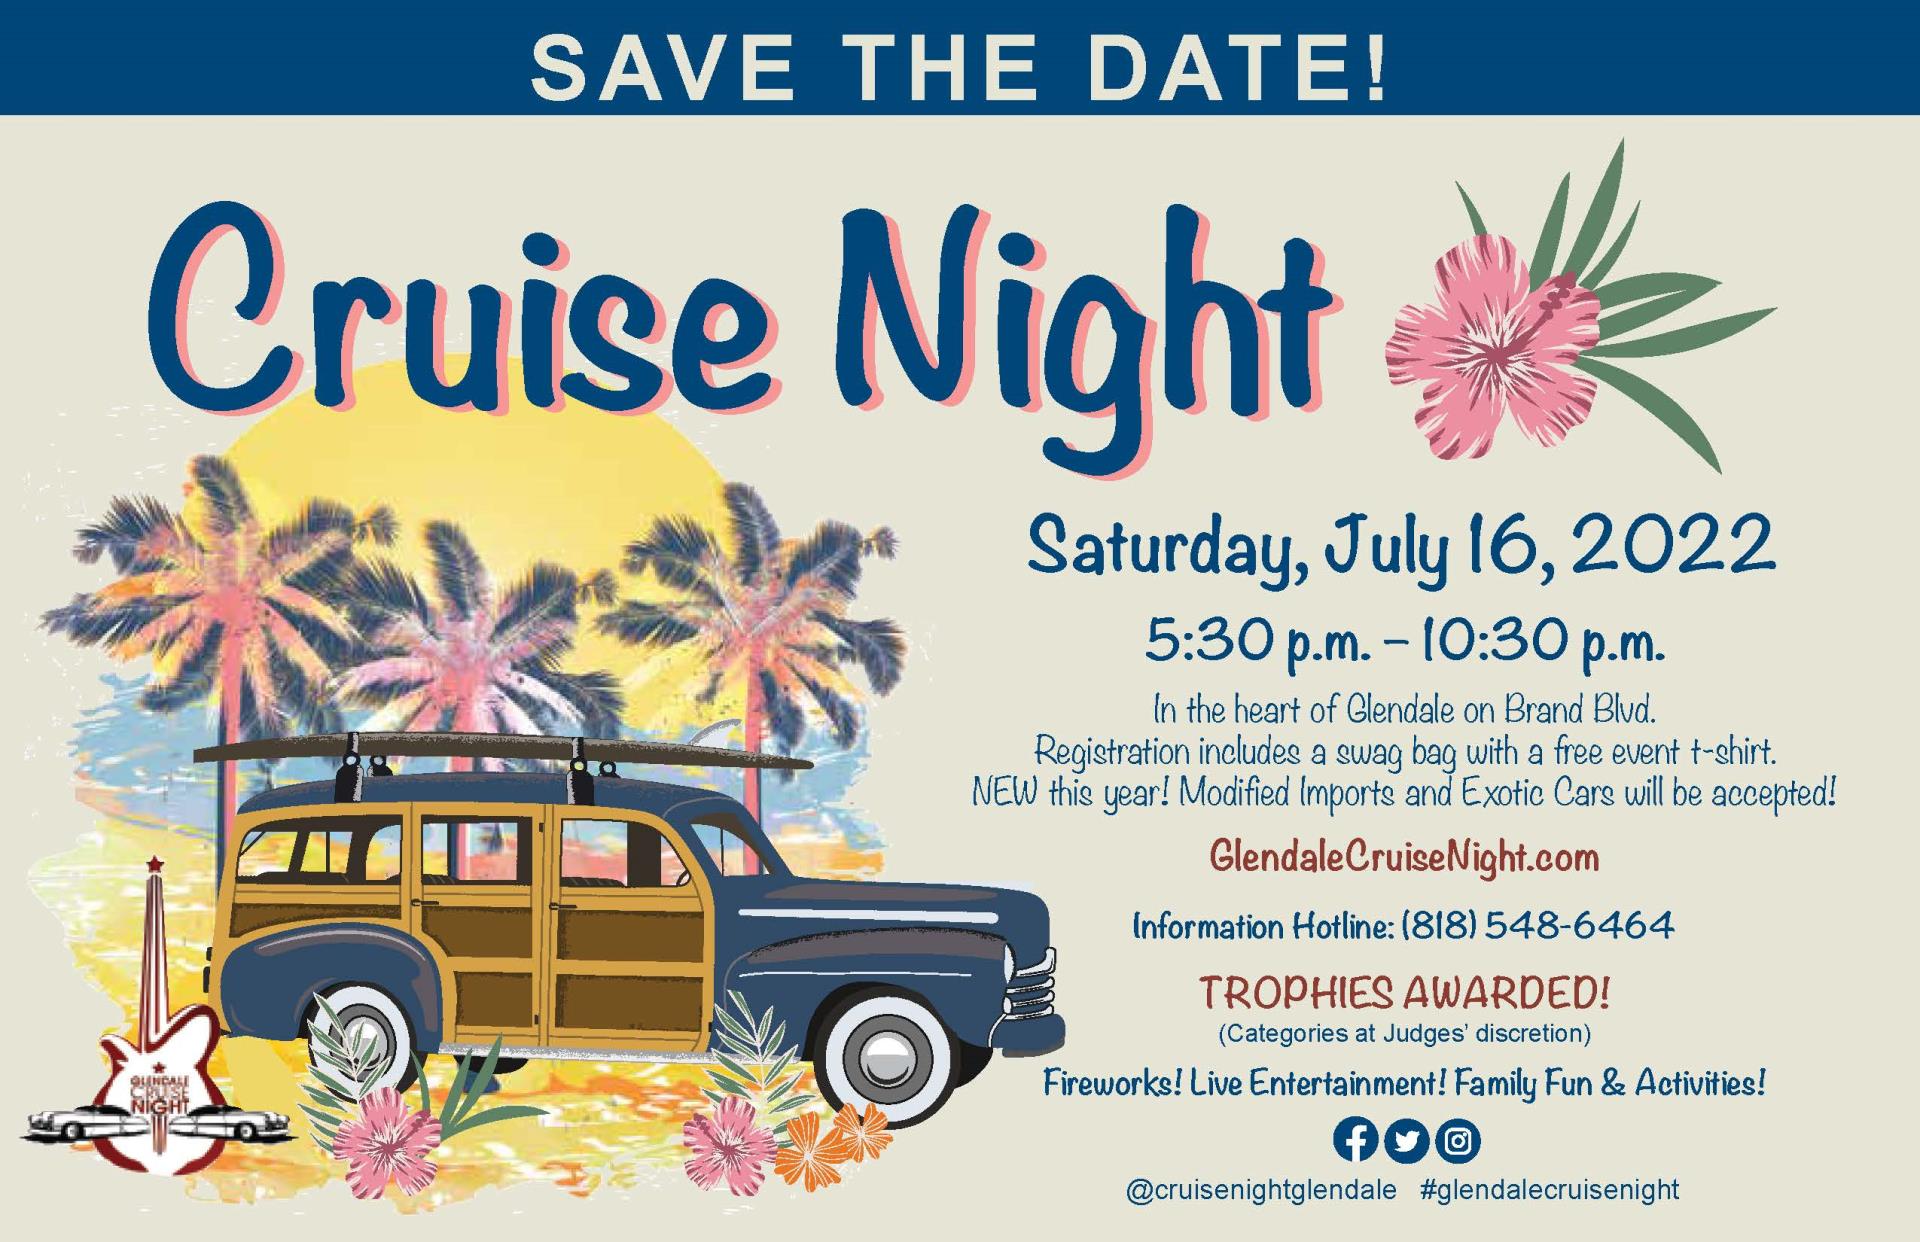 Cruise Night Save the Date 2022